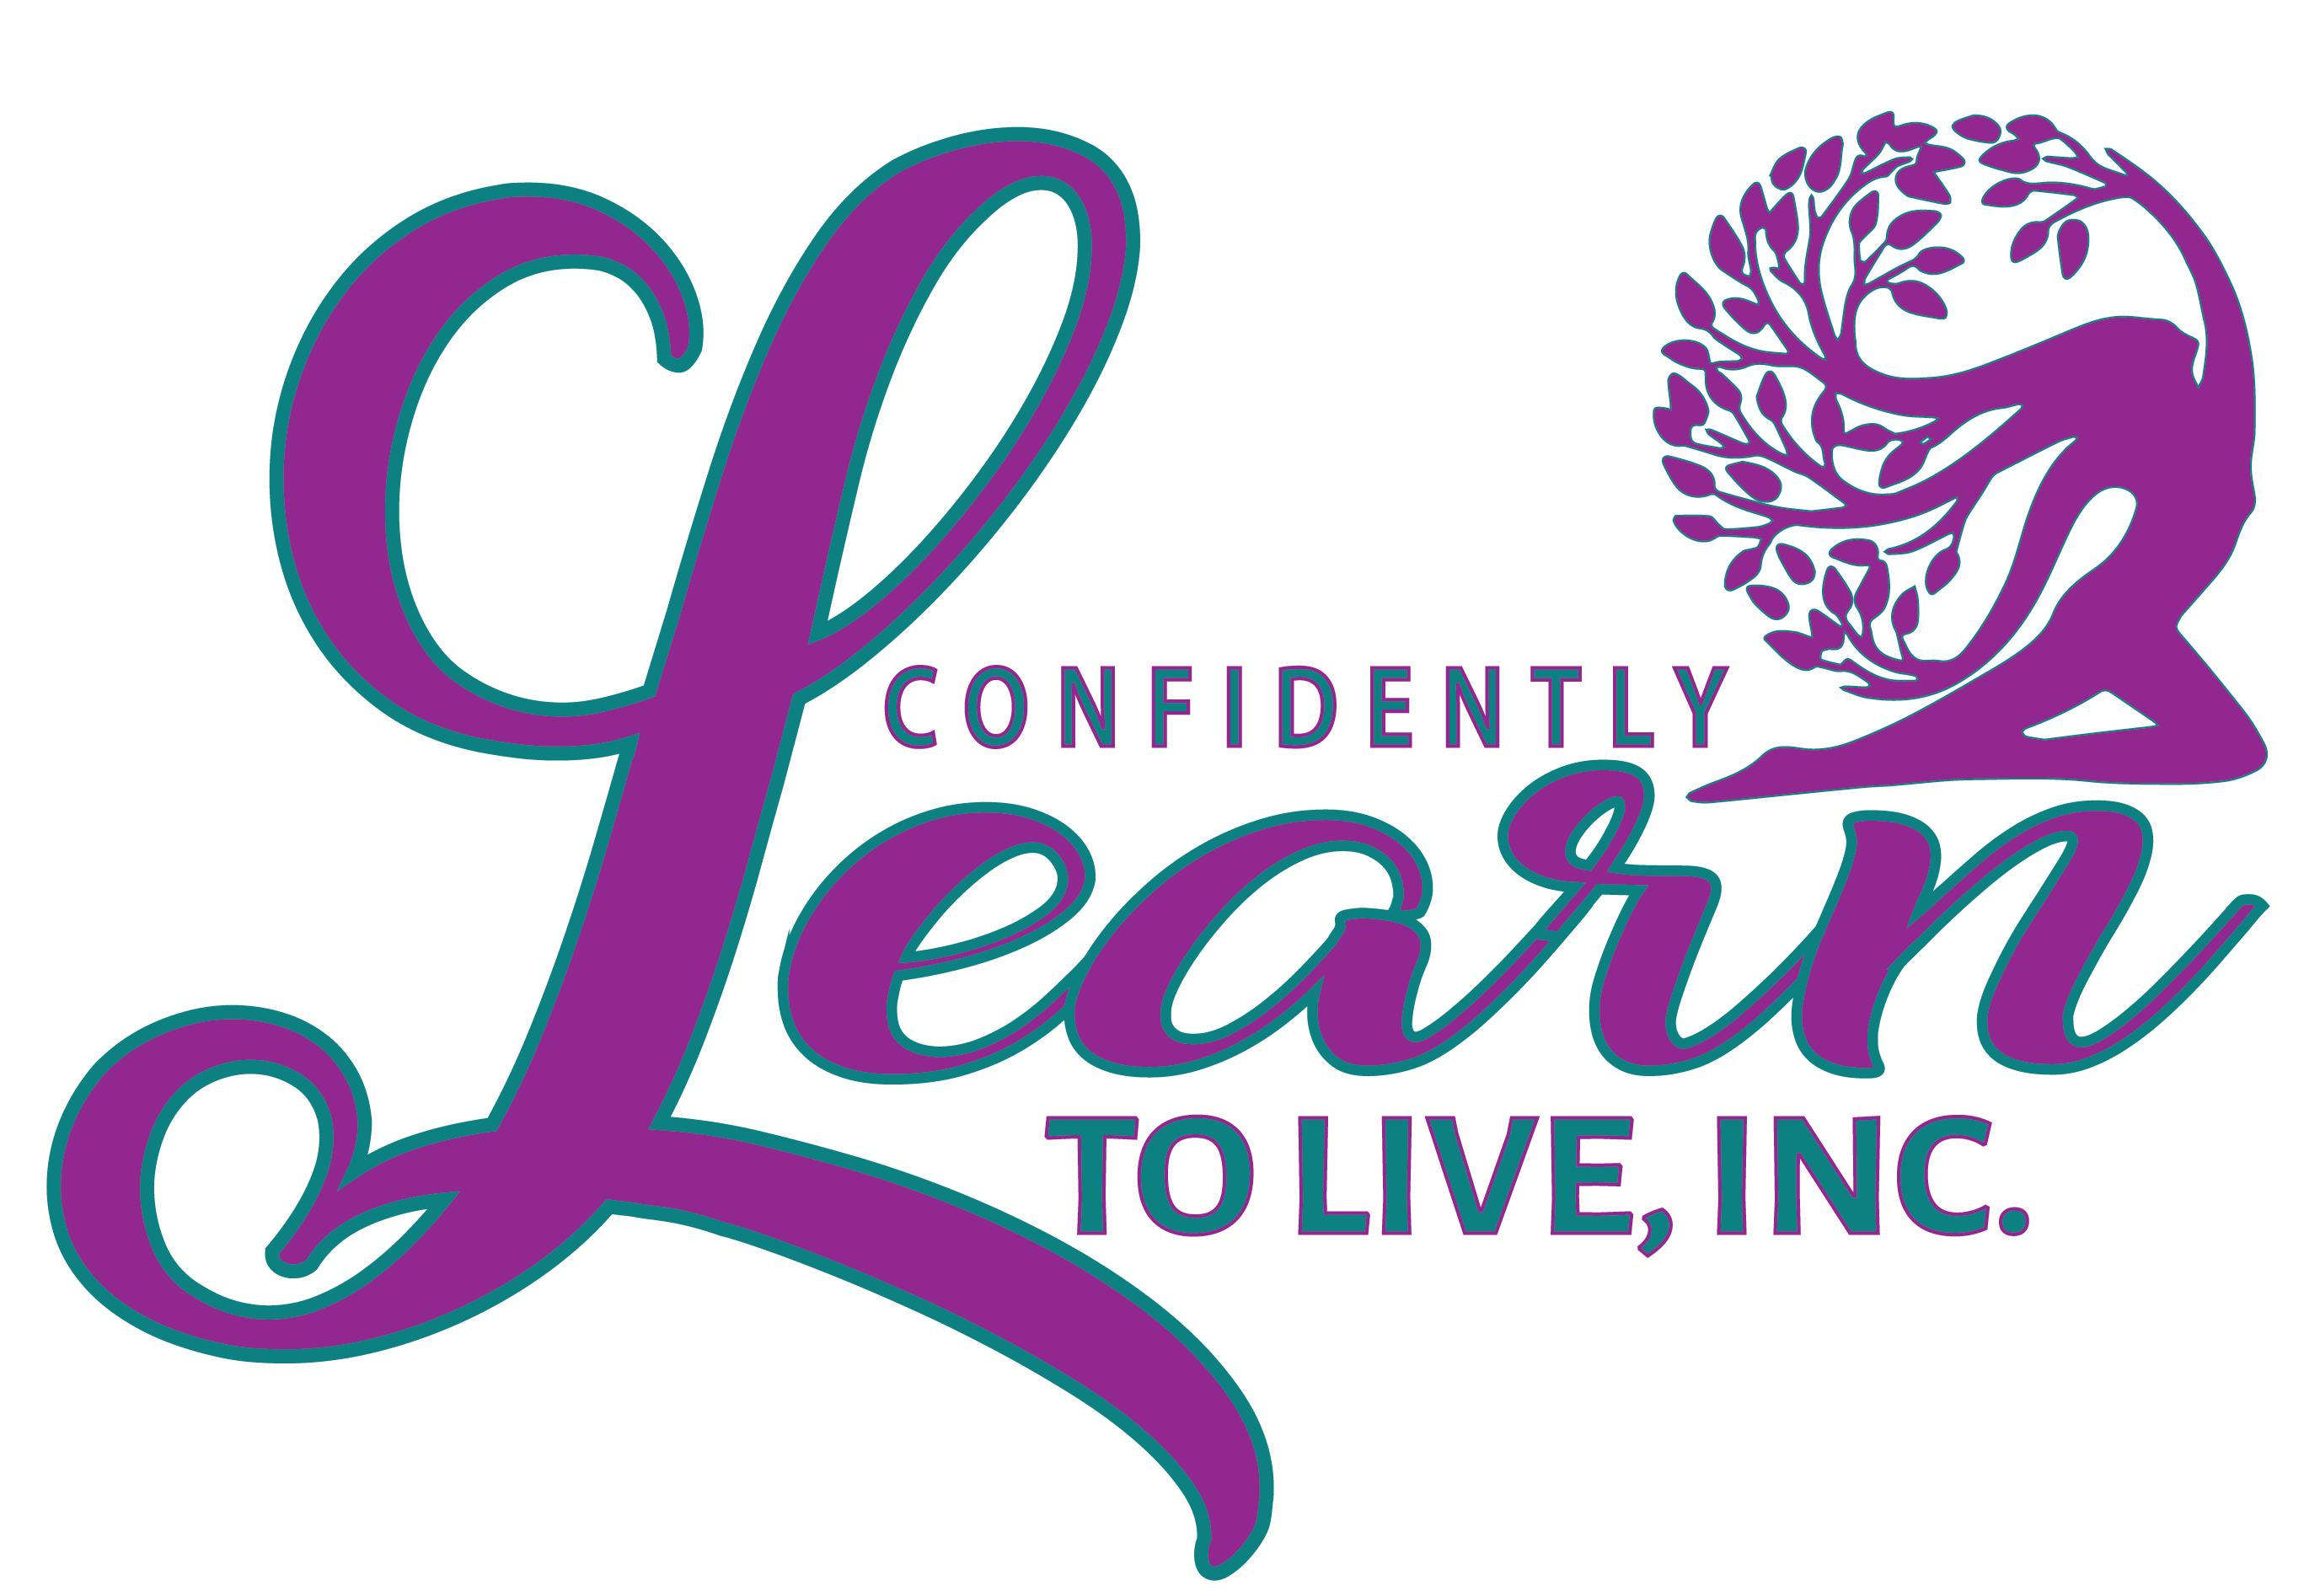 Confidently Learn To Live